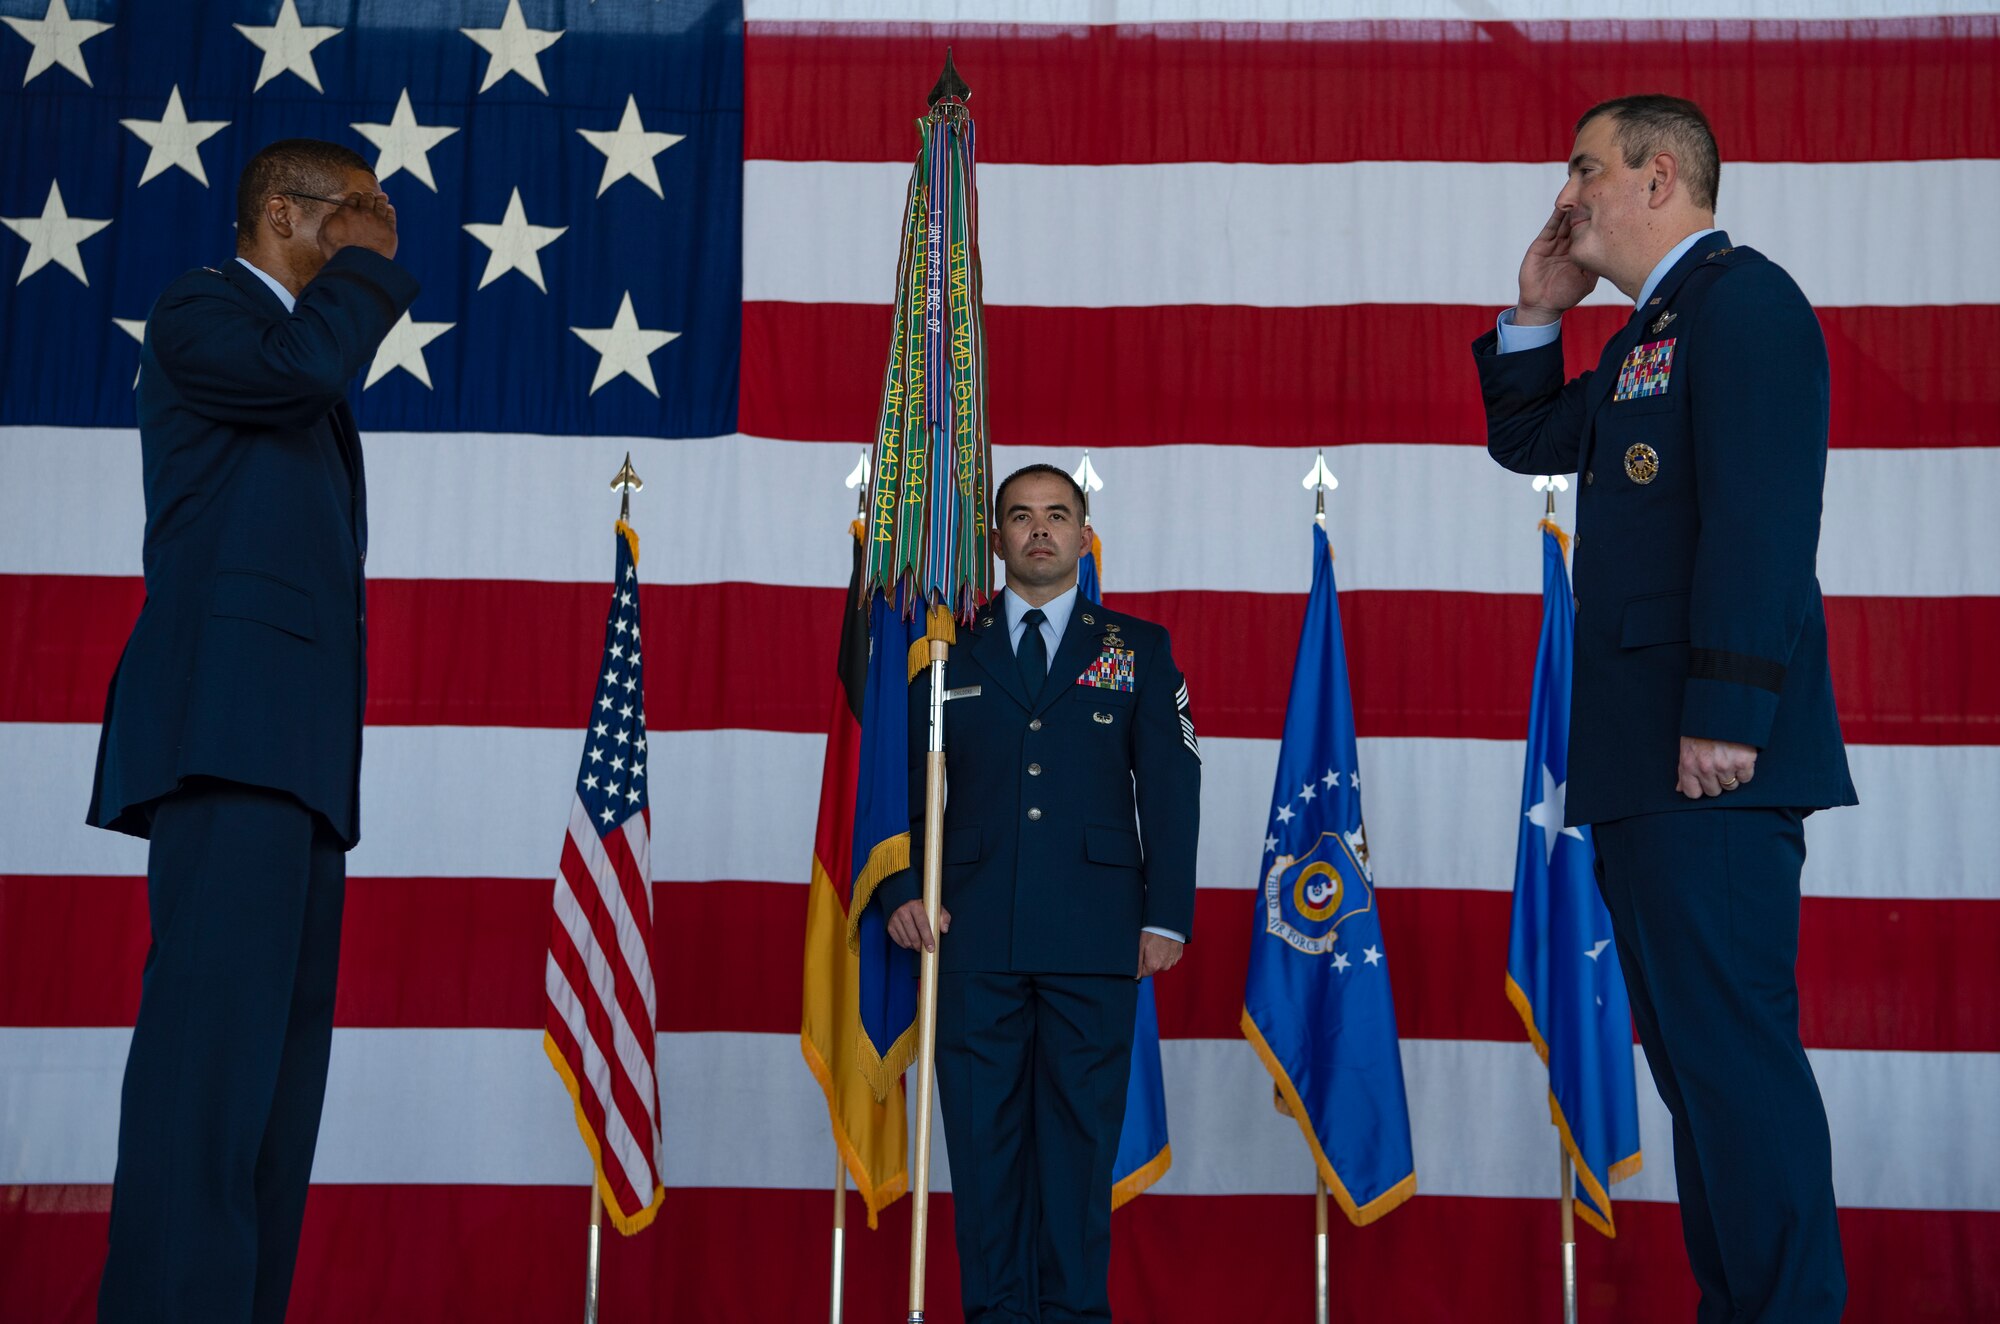 Two people saluting each other, while a third person is holding a guidon.